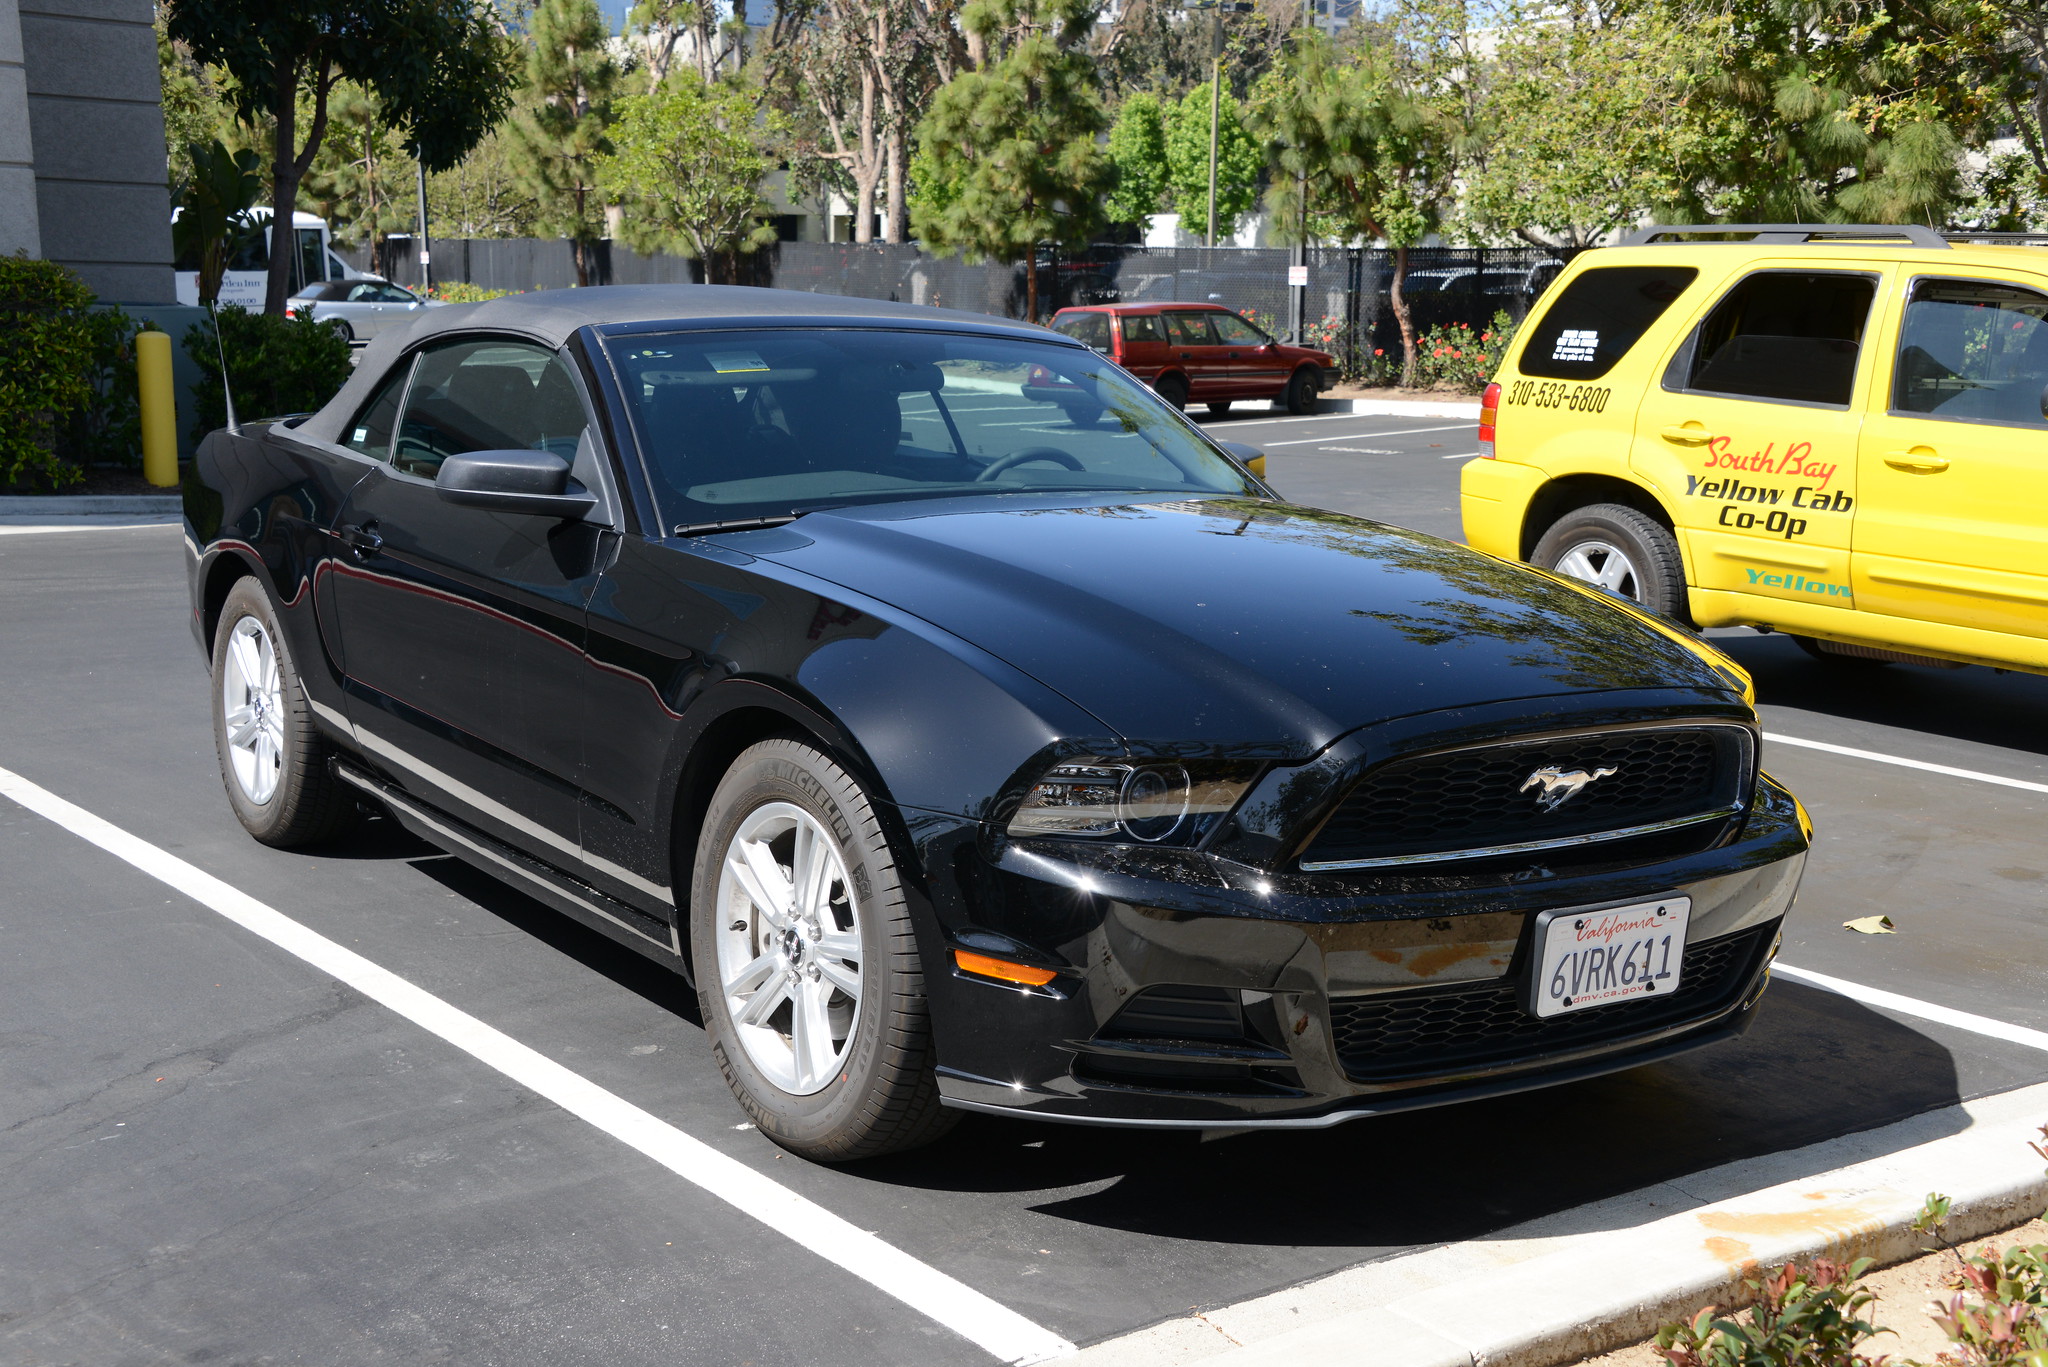 Our black Mustang for our road trip along the Pacific Coast Highway